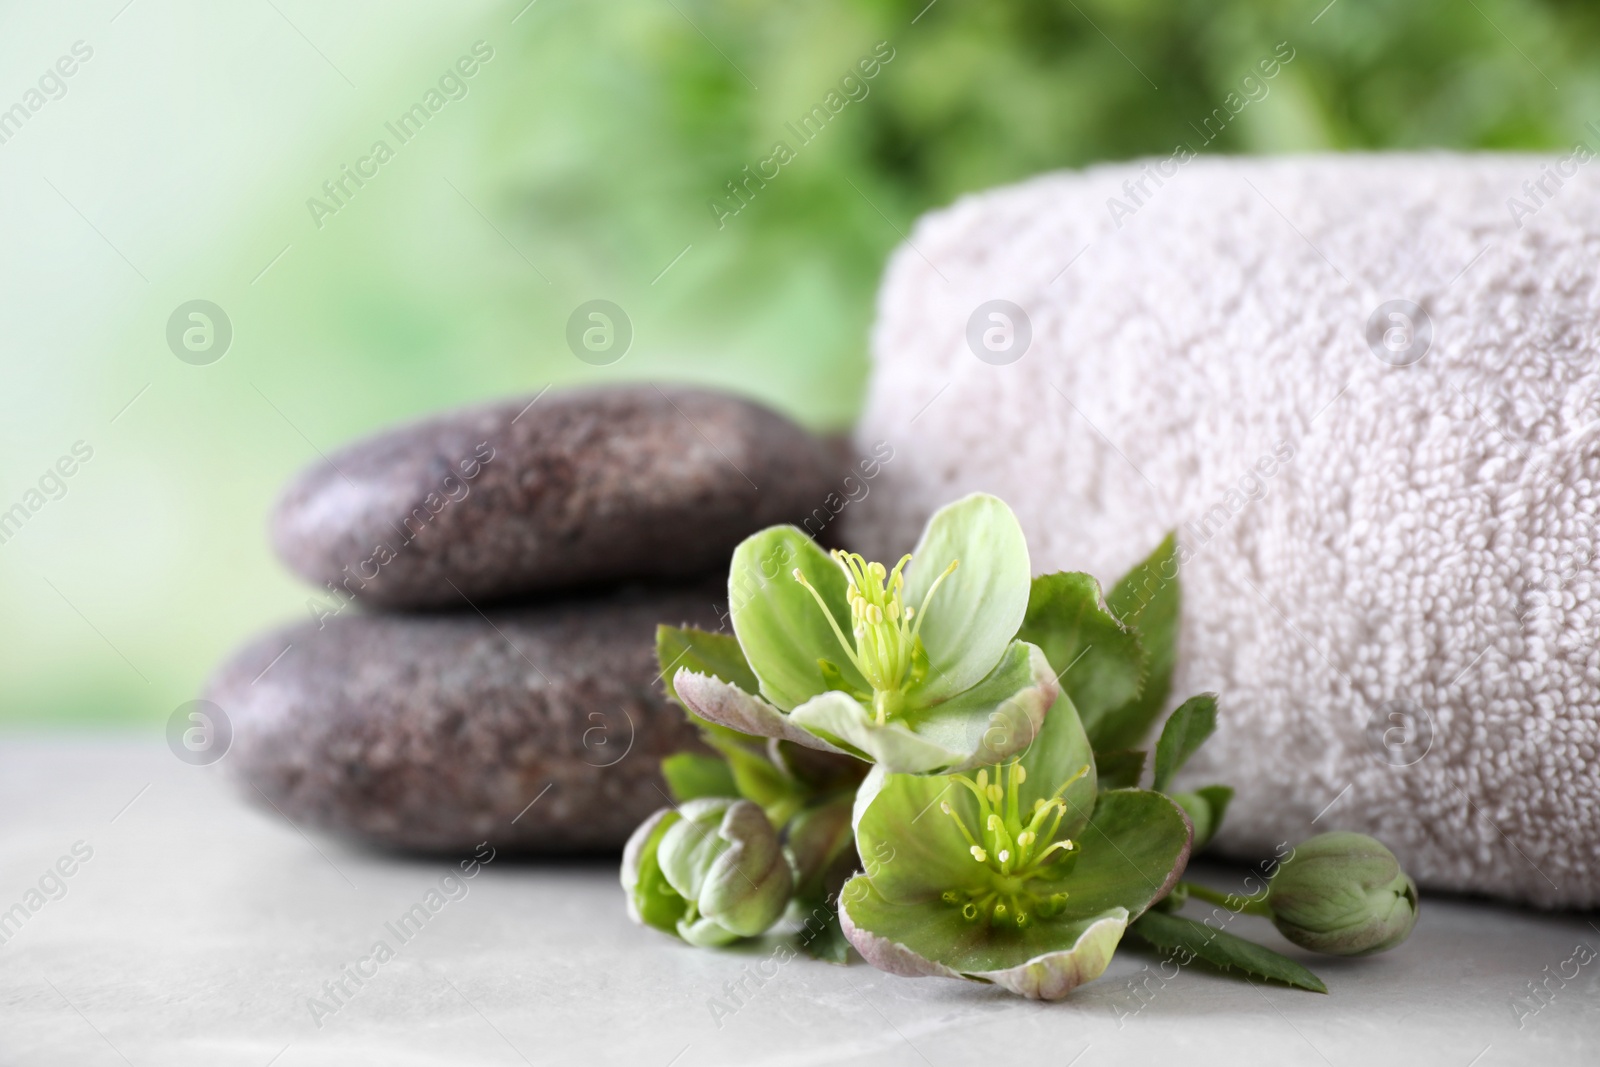 Photo of Composition with flowers, spa stones and towel on grey table against blurred background